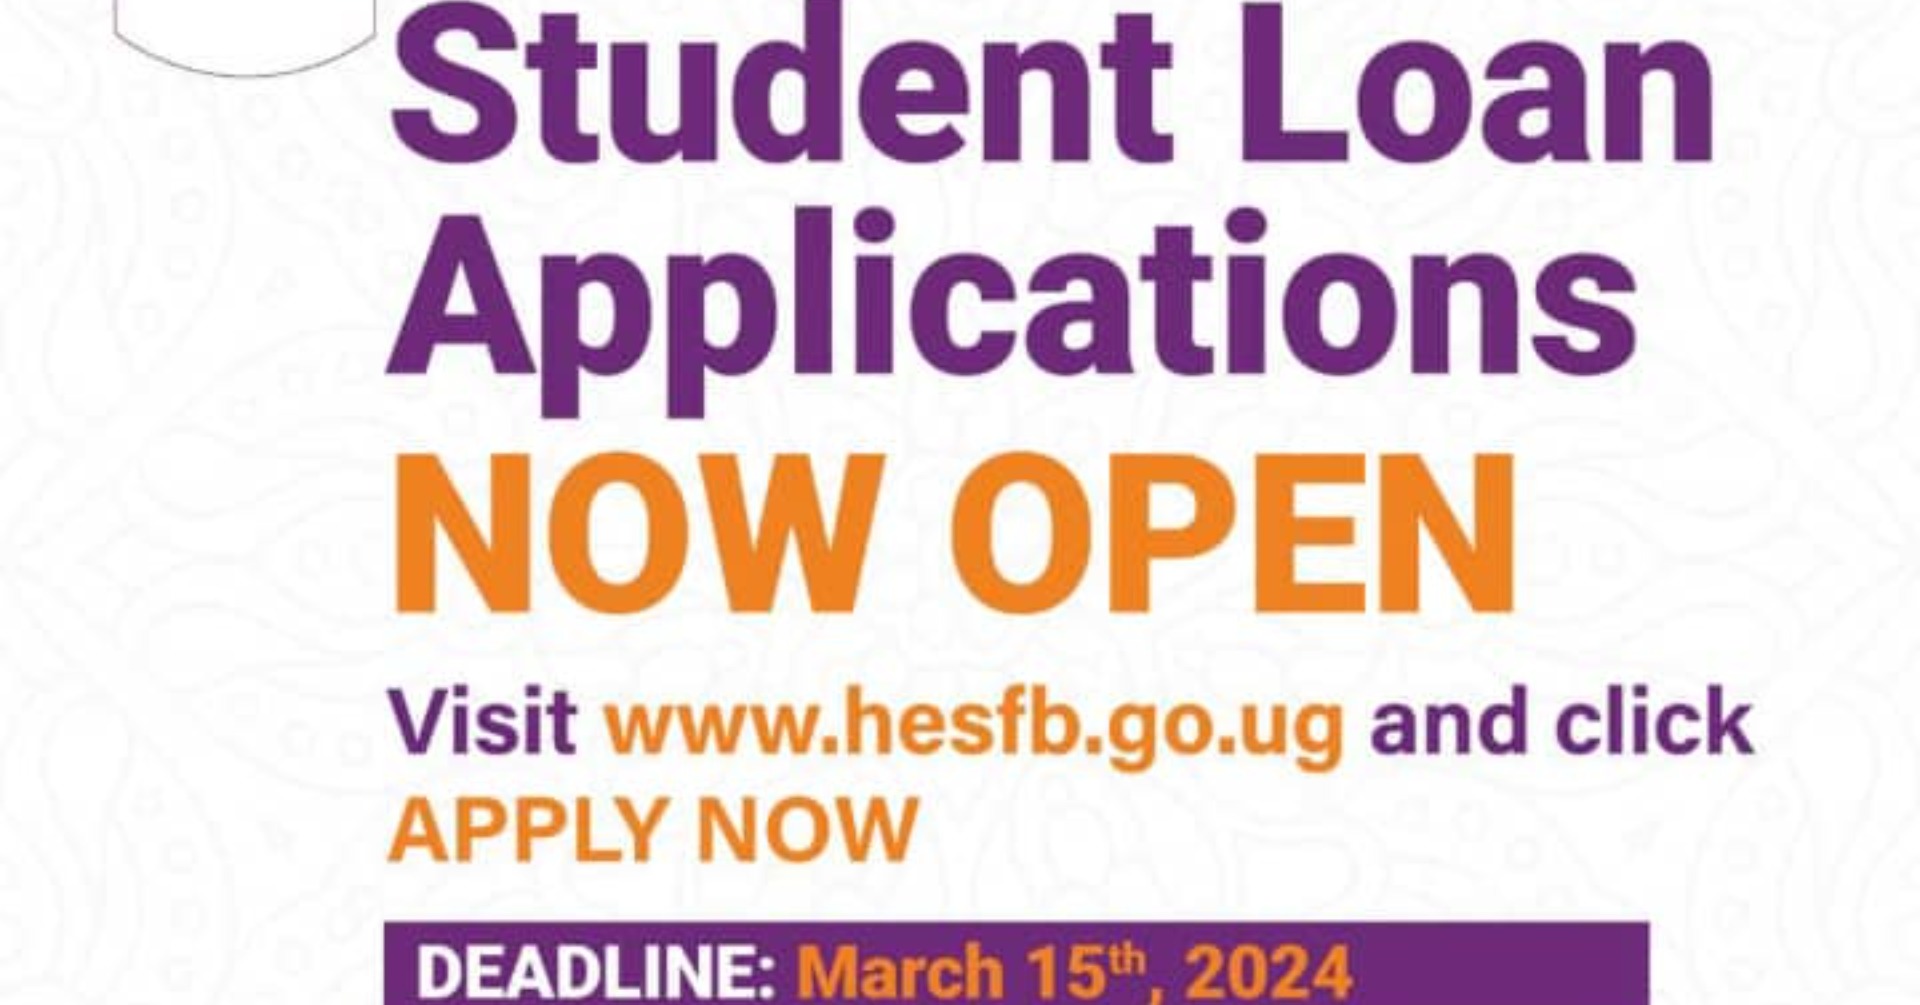 The Call For Students’ Loan Applications For Academic Year 2023/24